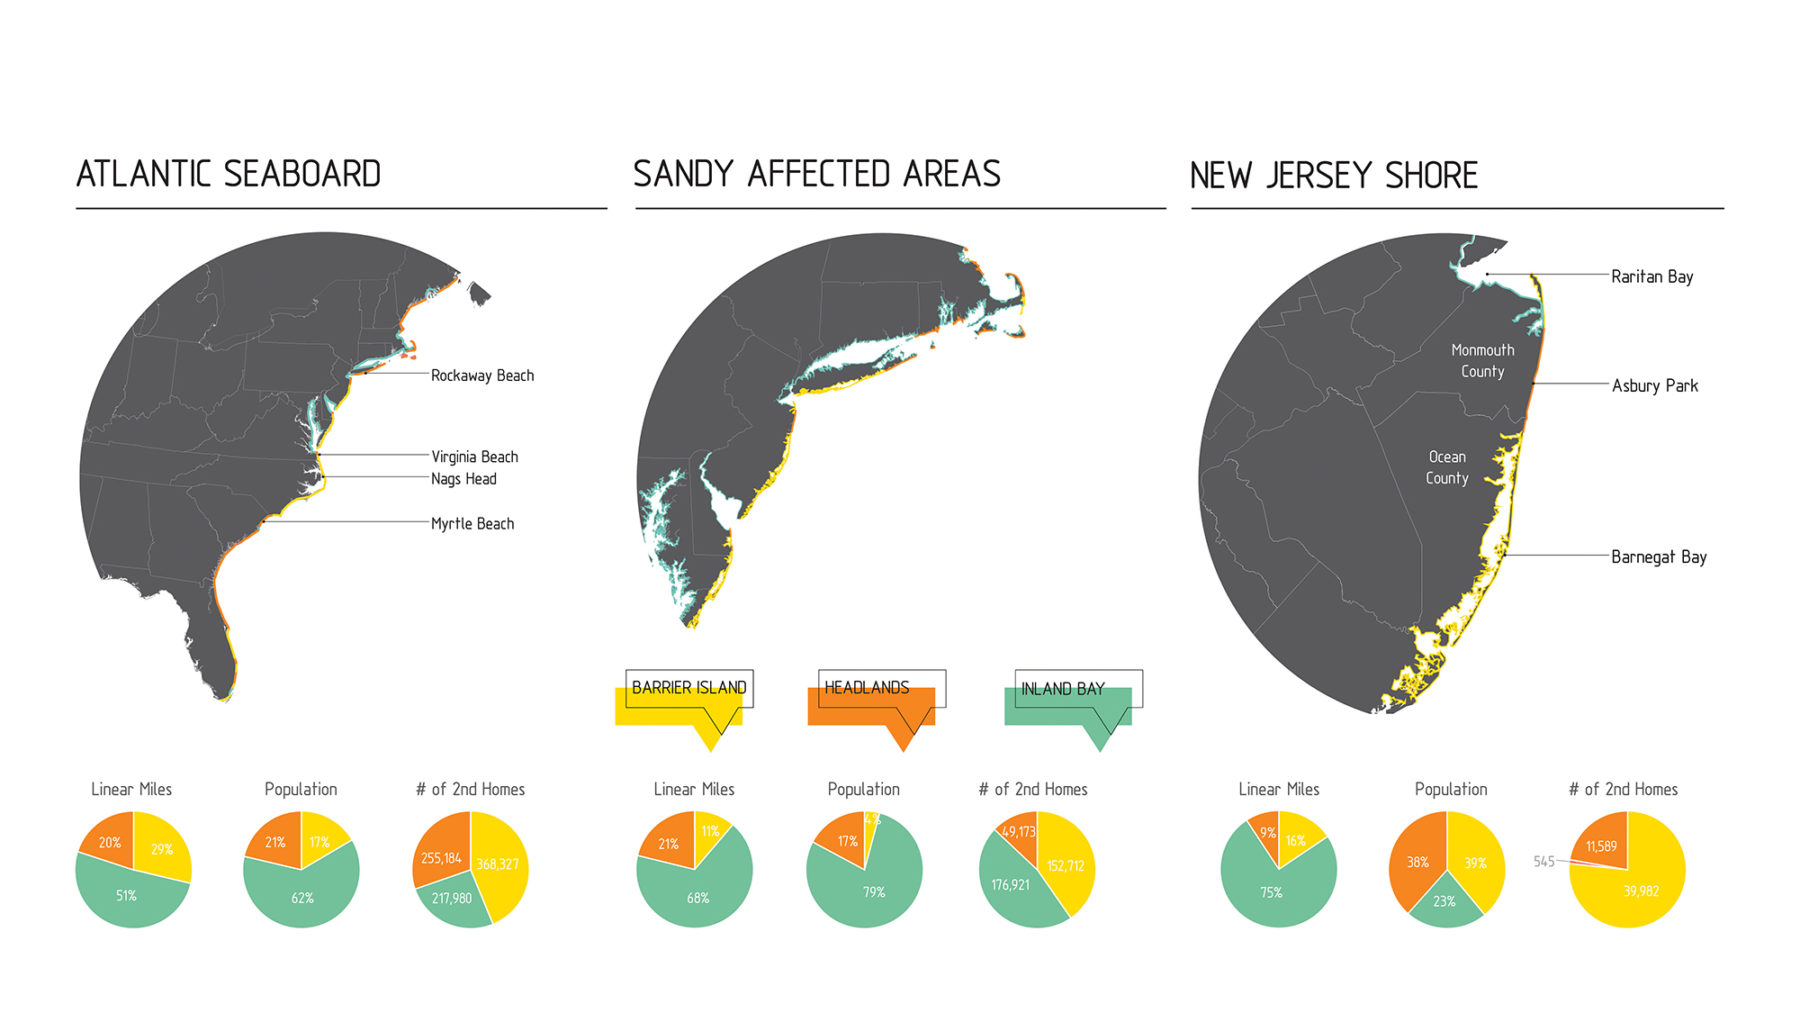 Diagram of how the landscape typologies lay out across the Atlantic seaboard, Hurricane Sandy affected areas, and the New Jersey Shore